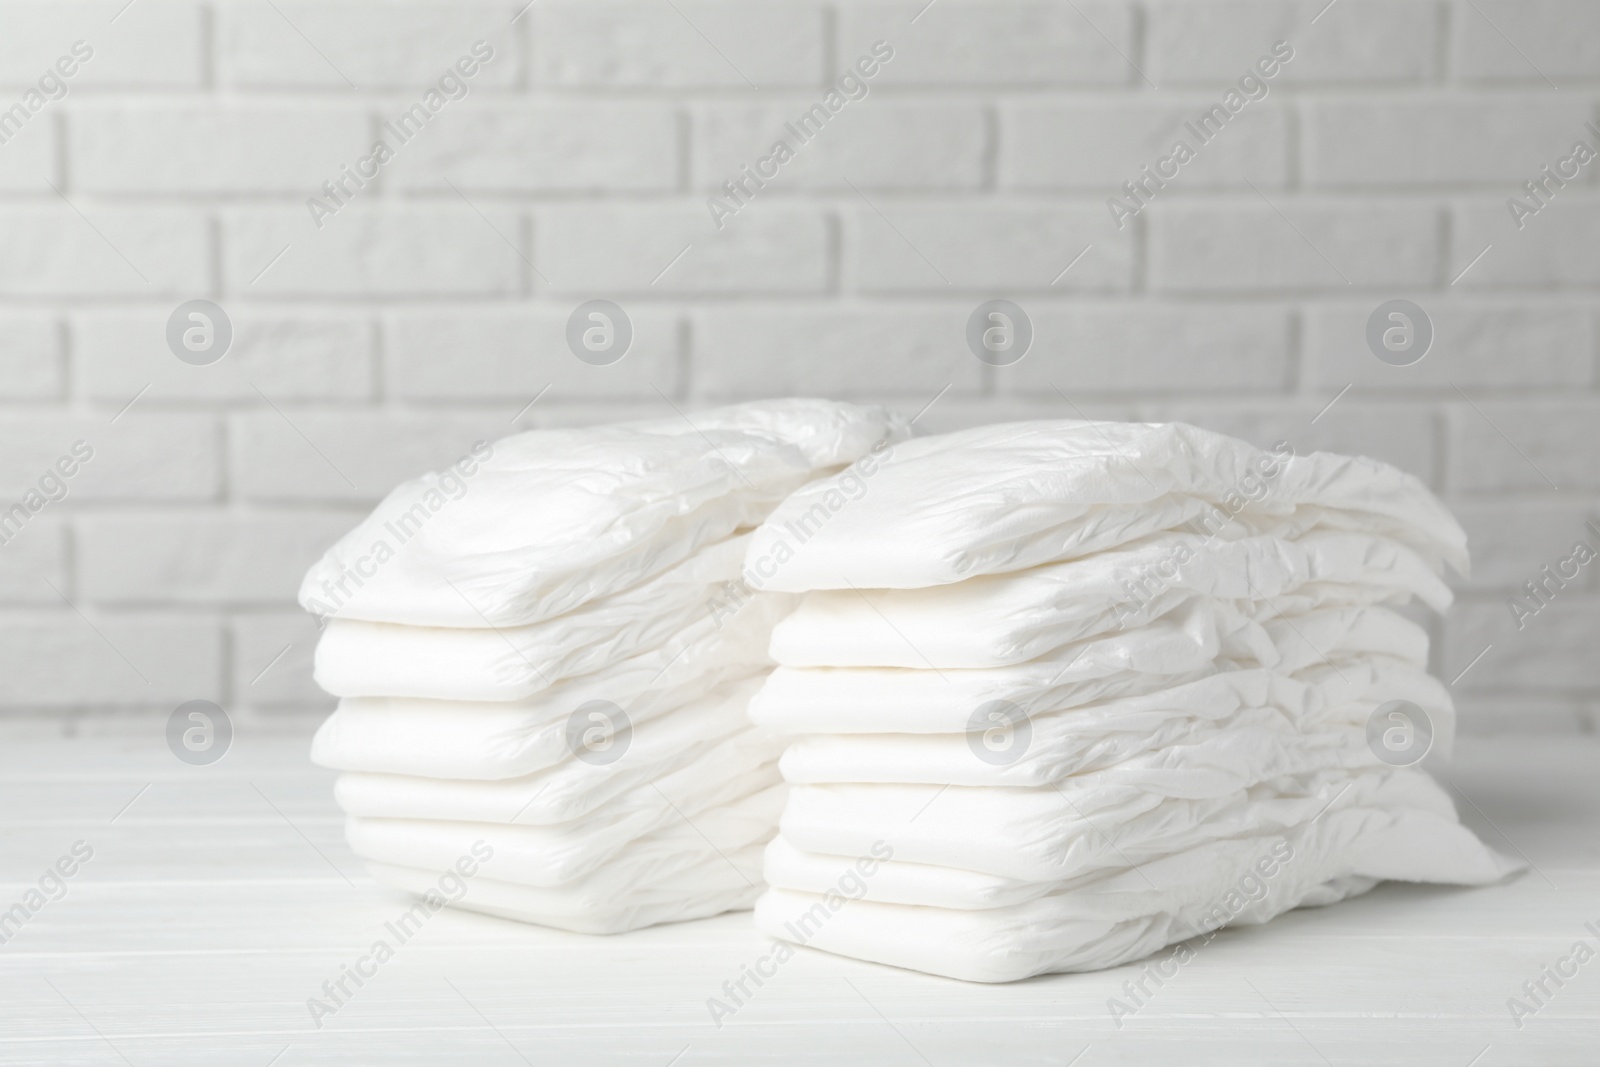 Photo of Baby diapers on wooden table against white brick wall